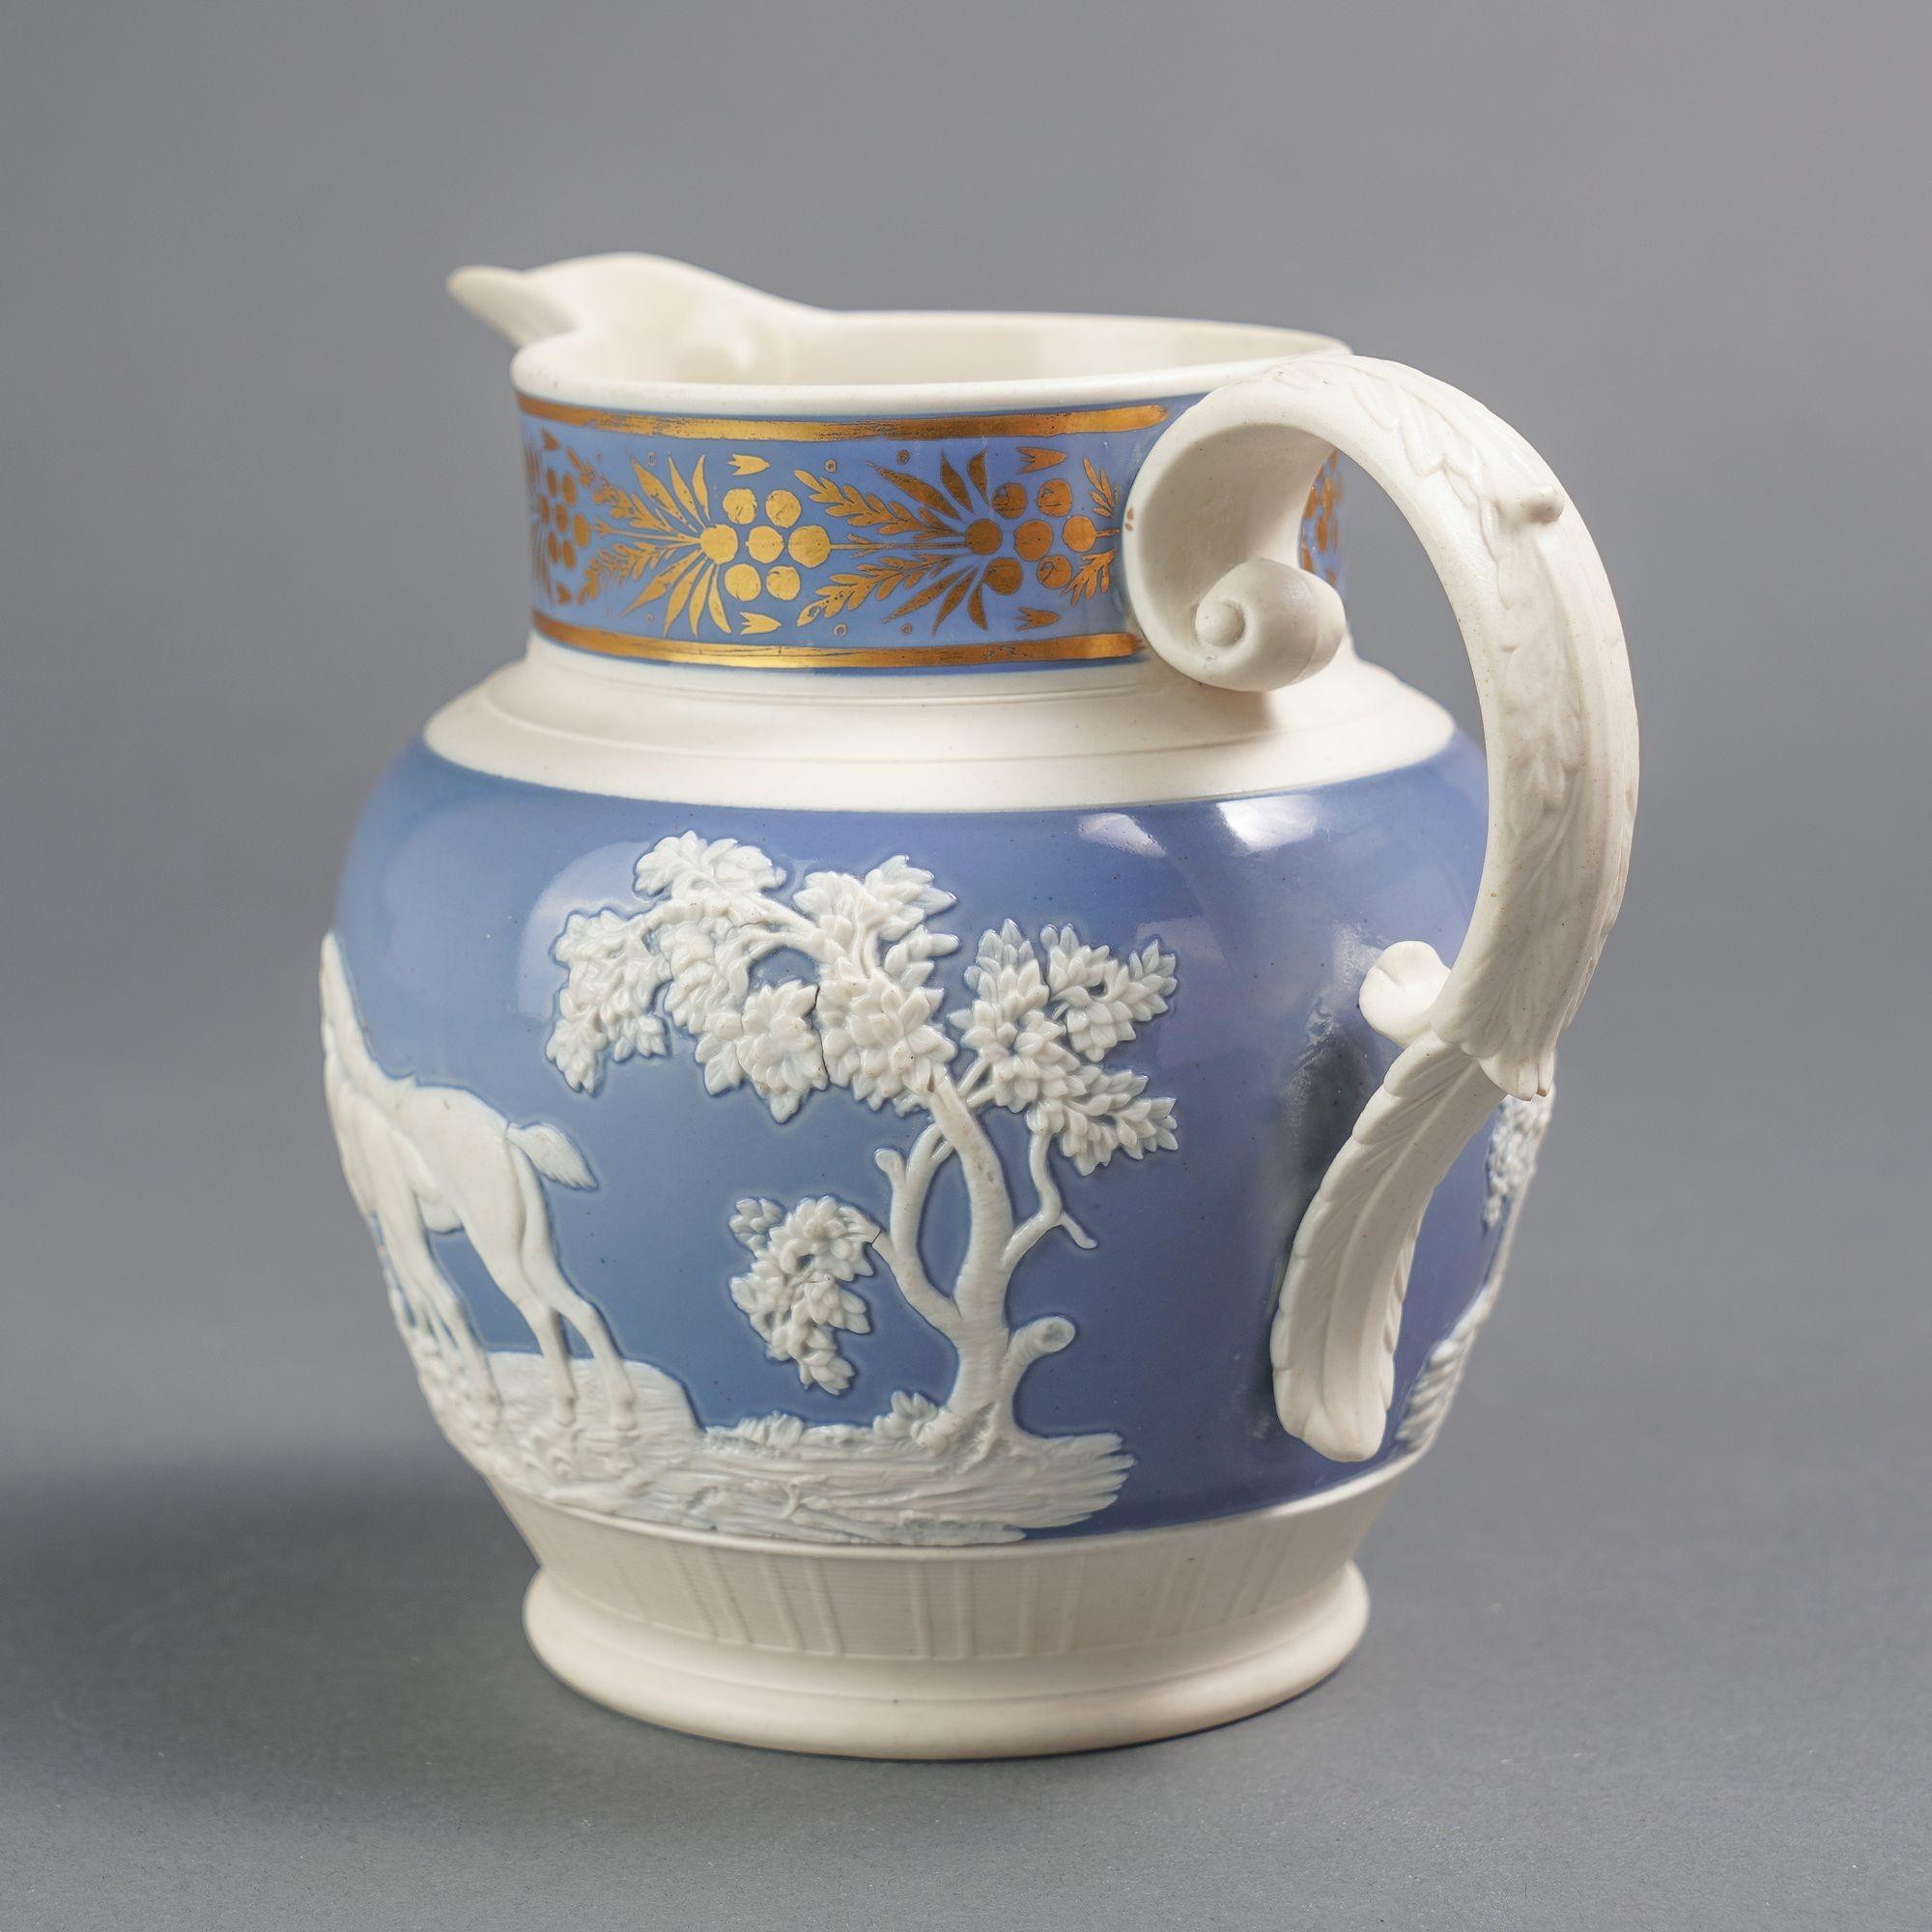 Feldspathic stoneware hunt jug with applied handle. The hunt scene relief rests on a ground of blue enamel. The neck of the pitcher has a gilt trailing decoration in the Classical taste, also on a blue enamel ground. Attributed to Chetham &